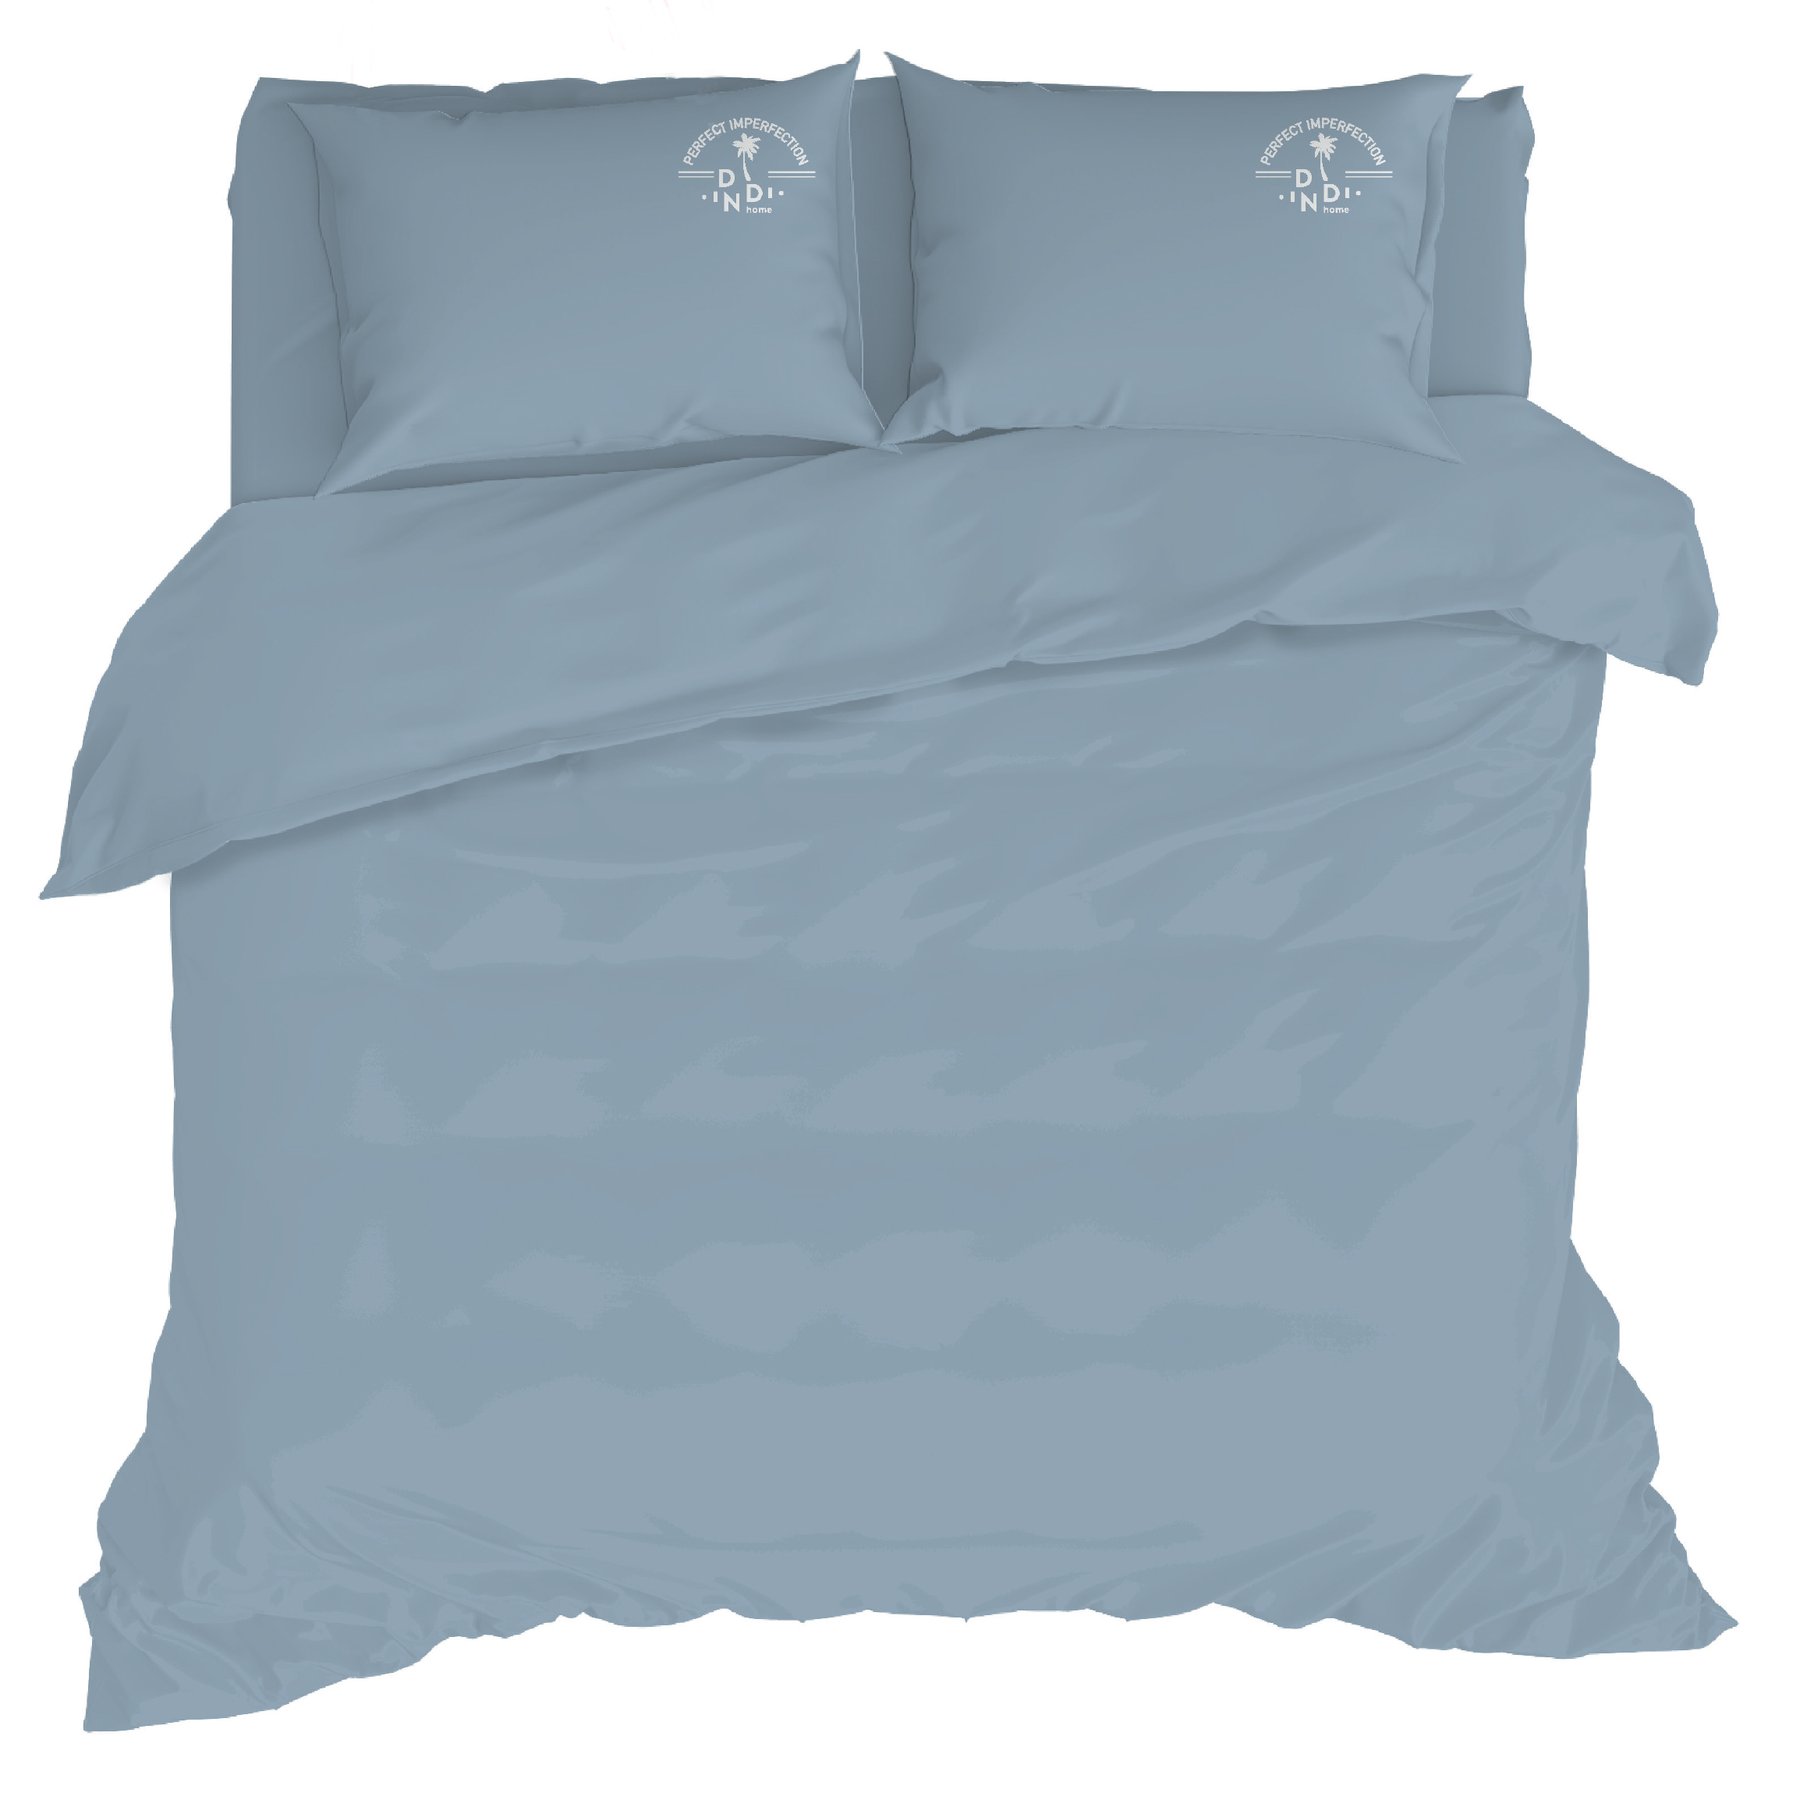 Grey Charm Comforter with Pillow Covers